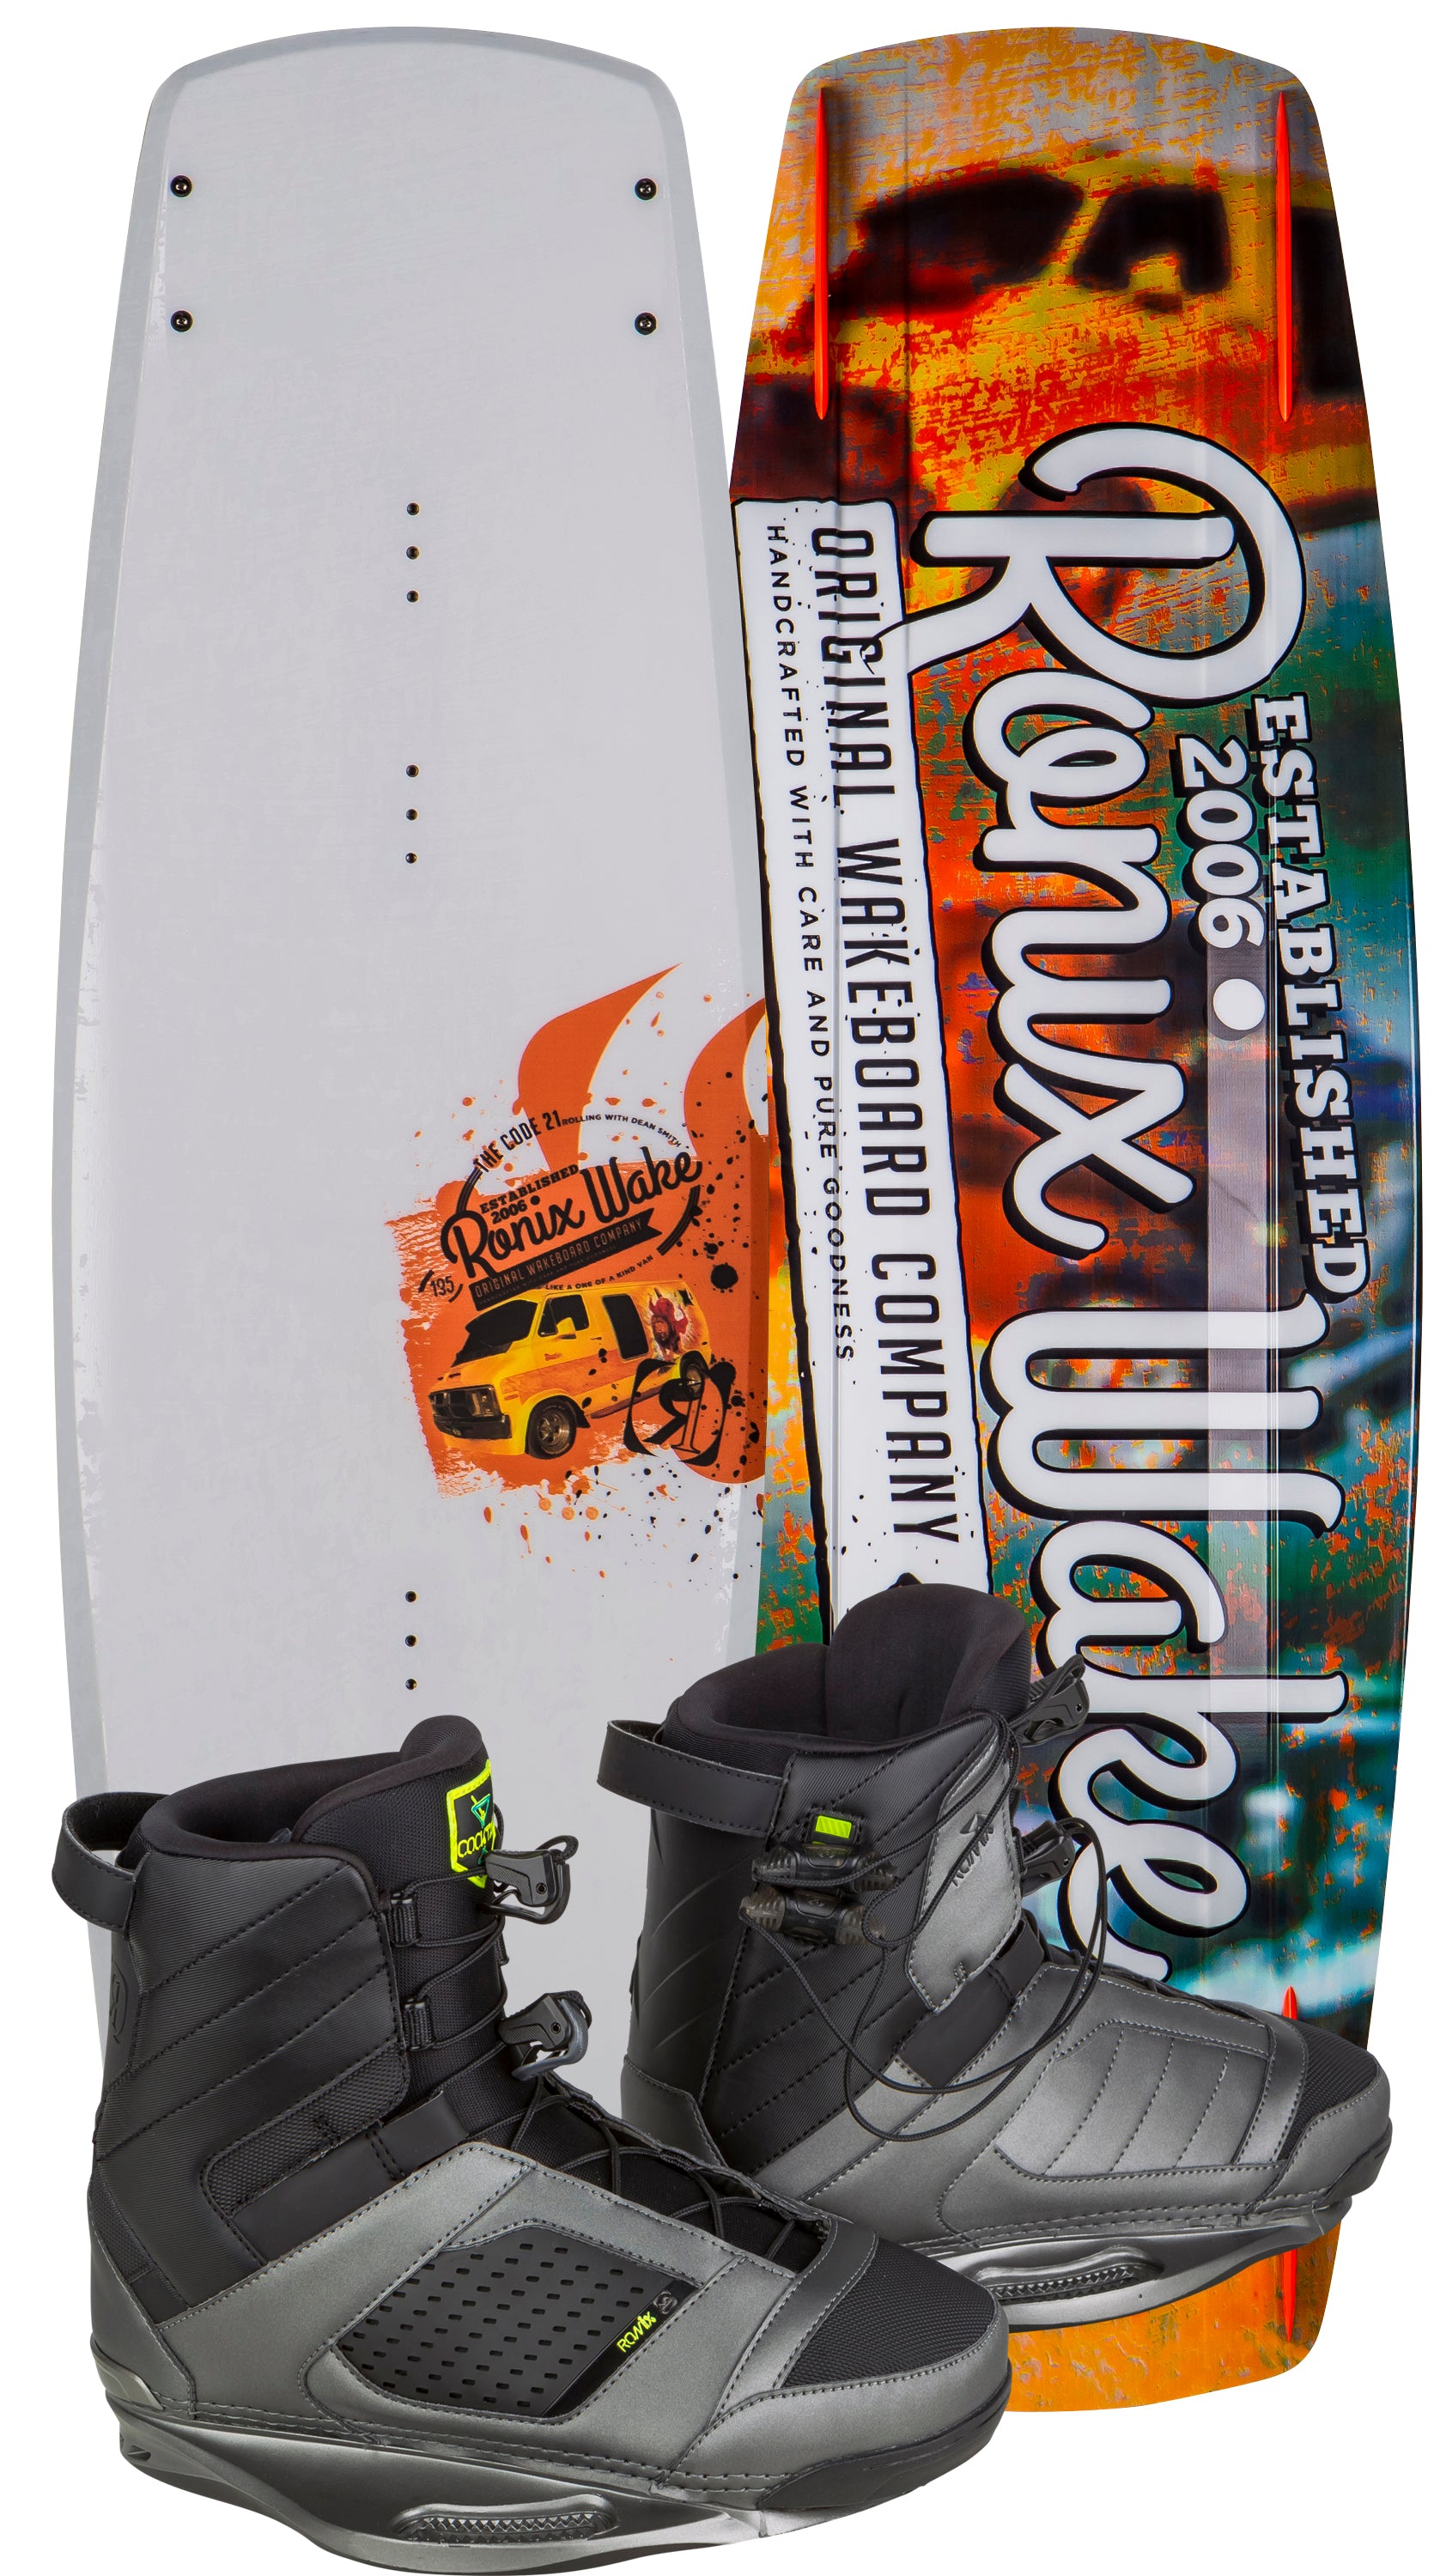 buy the best selling wakeboard packages